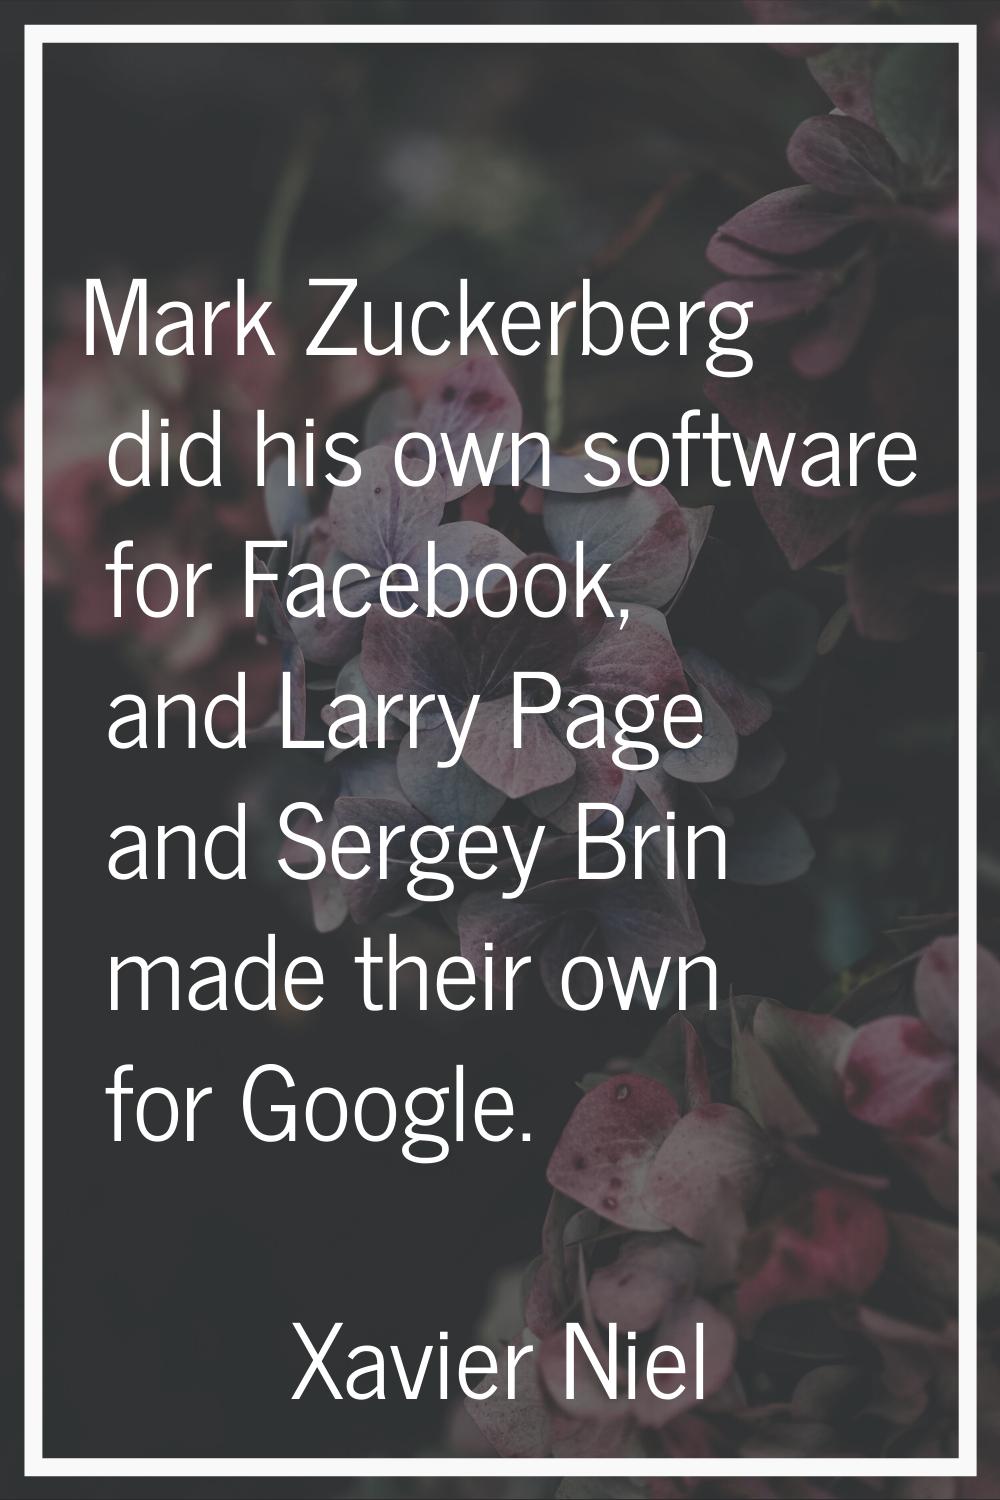 Mark Zuckerberg did his own software for Facebook, and Larry Page and Sergey Brin made their own fo